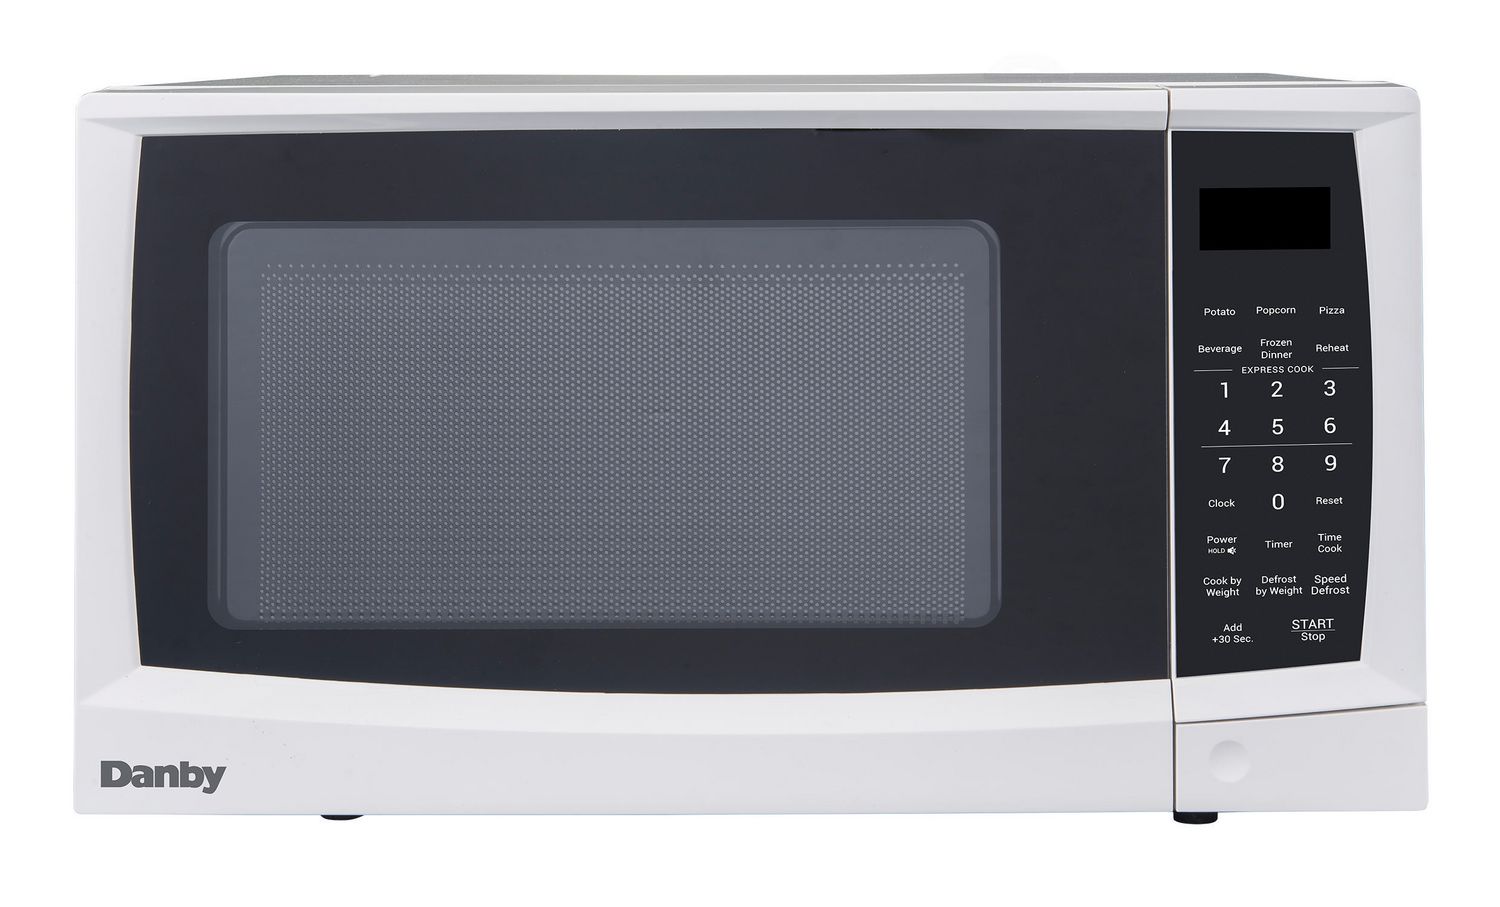 Danby Products Danby 0.7 Cu. Ft. Microwave | Walmart Canada